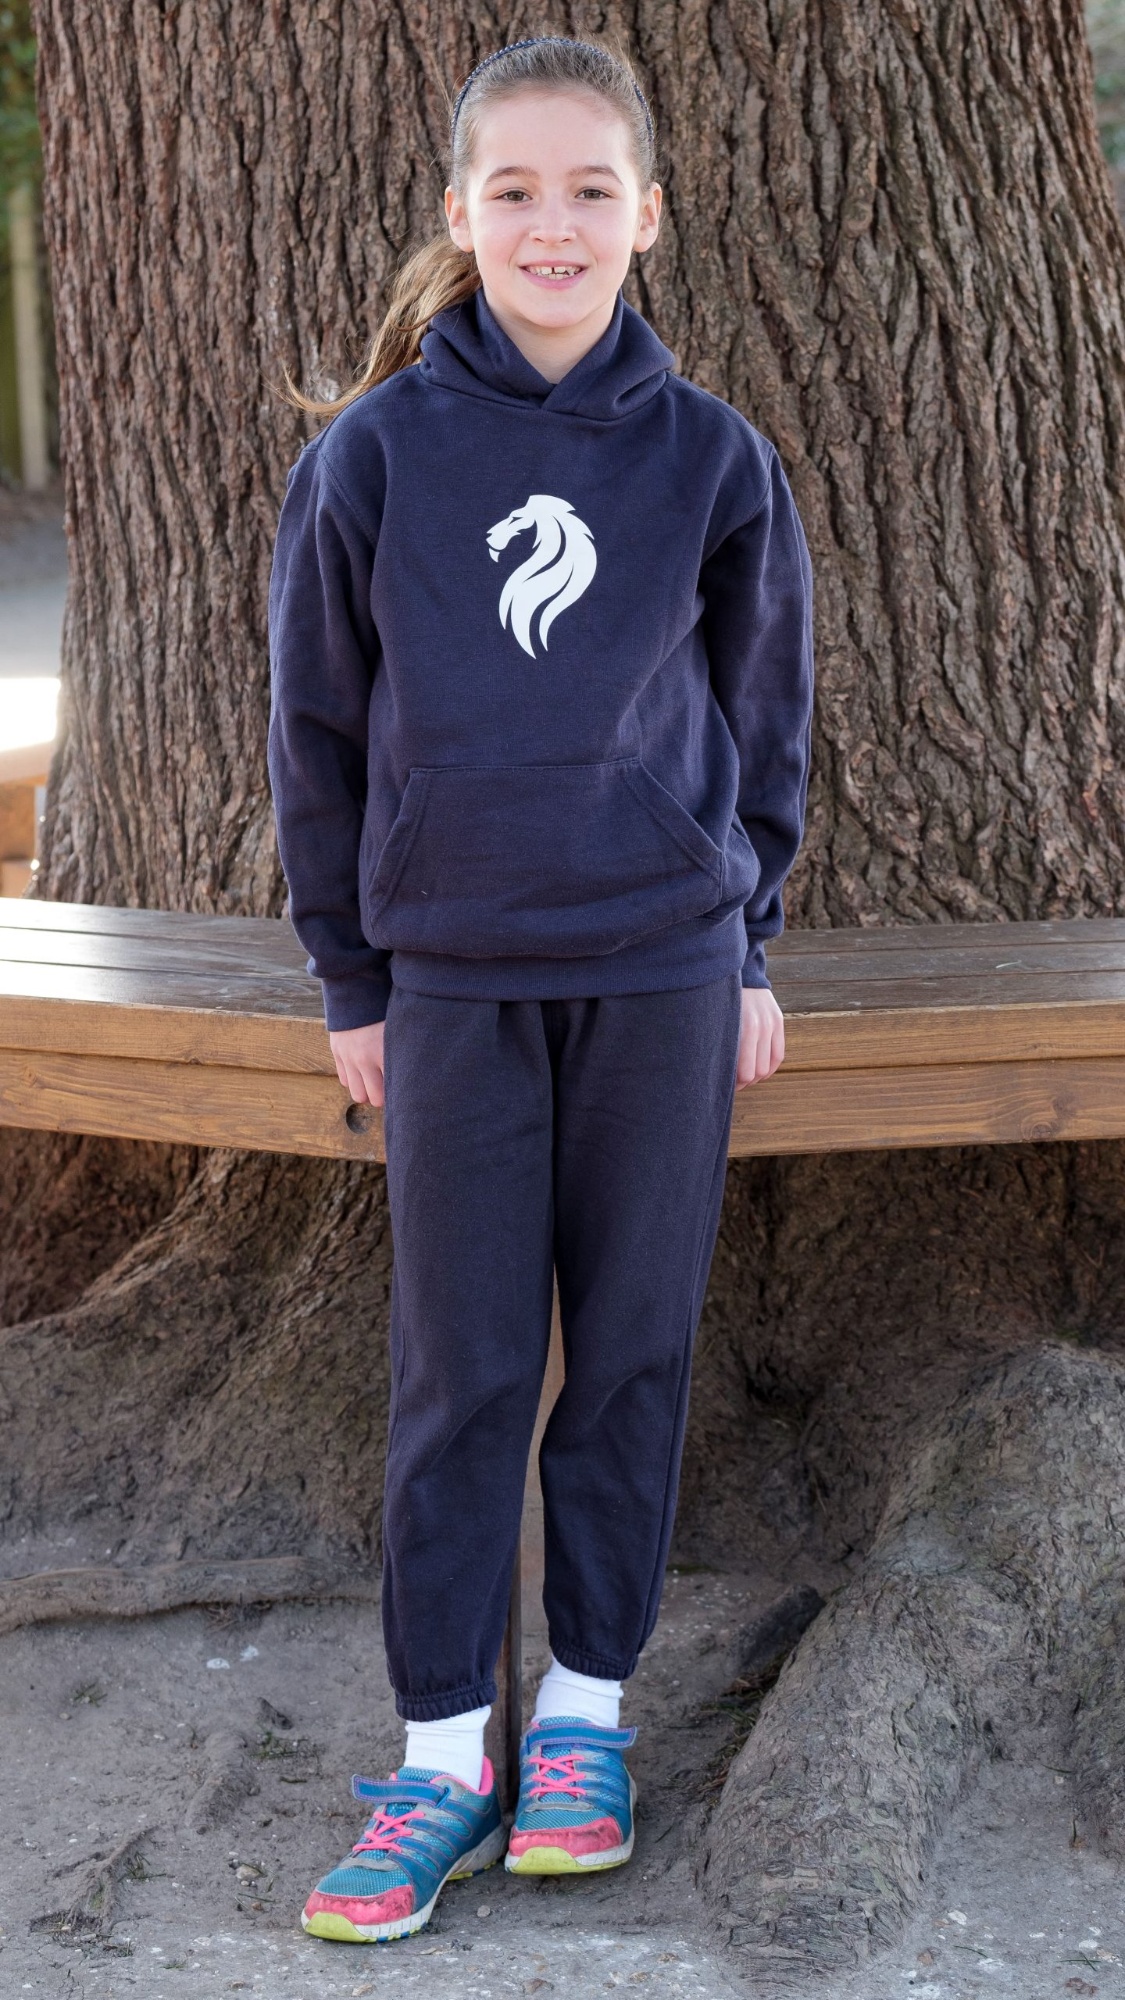 A female pupil stands outside wearing her outdoor PE kit, consisting of a school sports hooded top and jogging bottoms